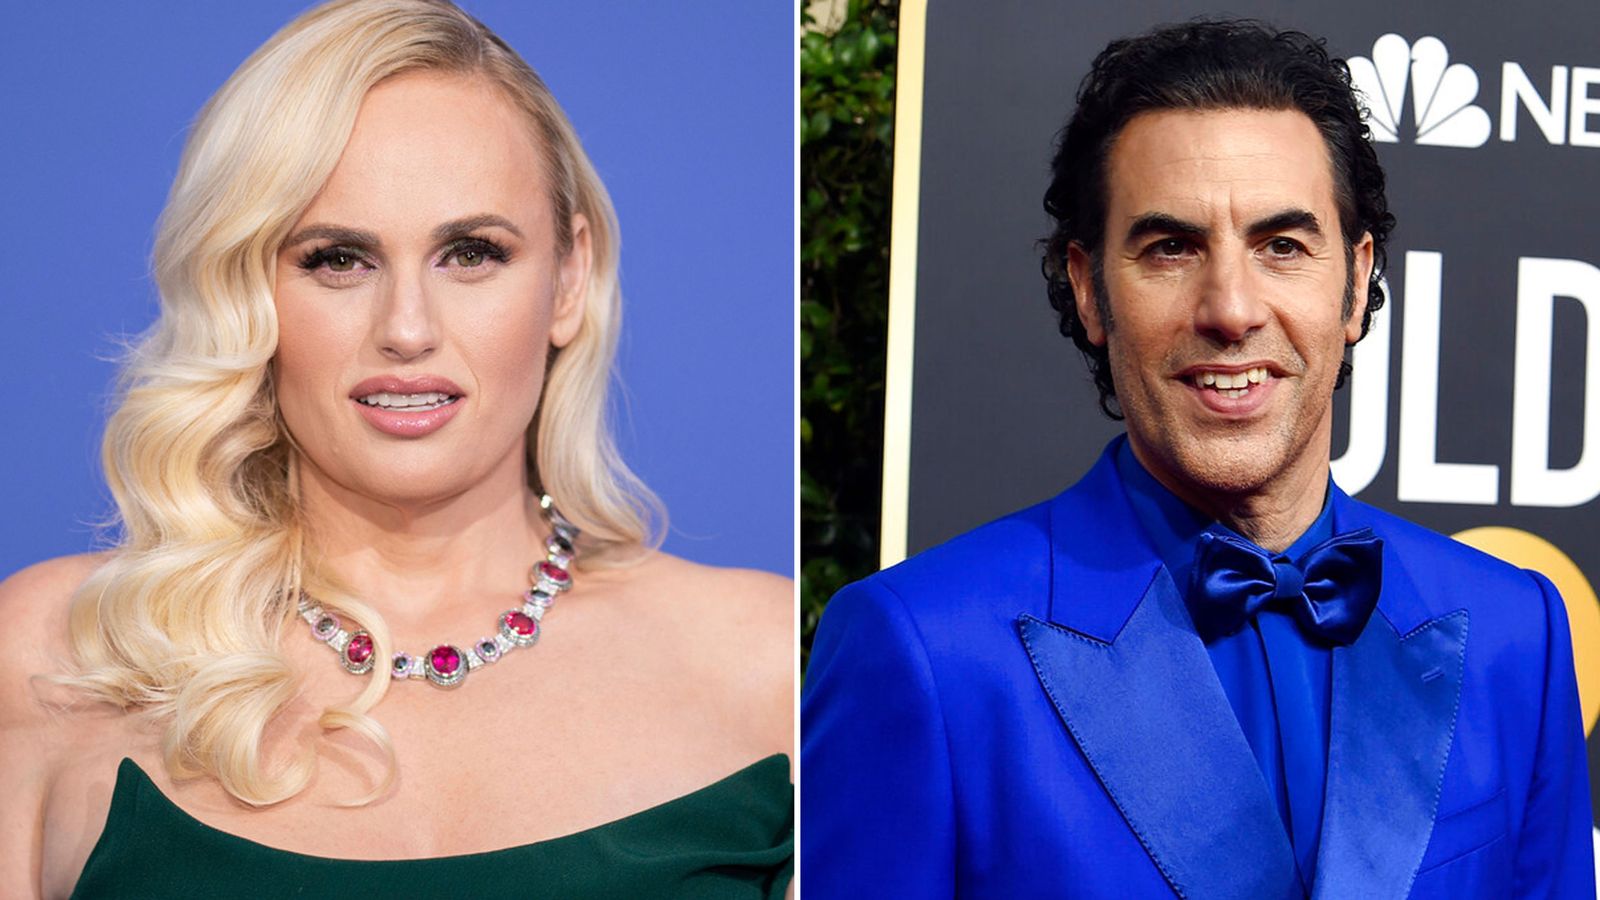 Sacha Baron Cohen says Rebel Wilson claims are 'demonstrably false' after she confirms he is the 'a**hole' in her book